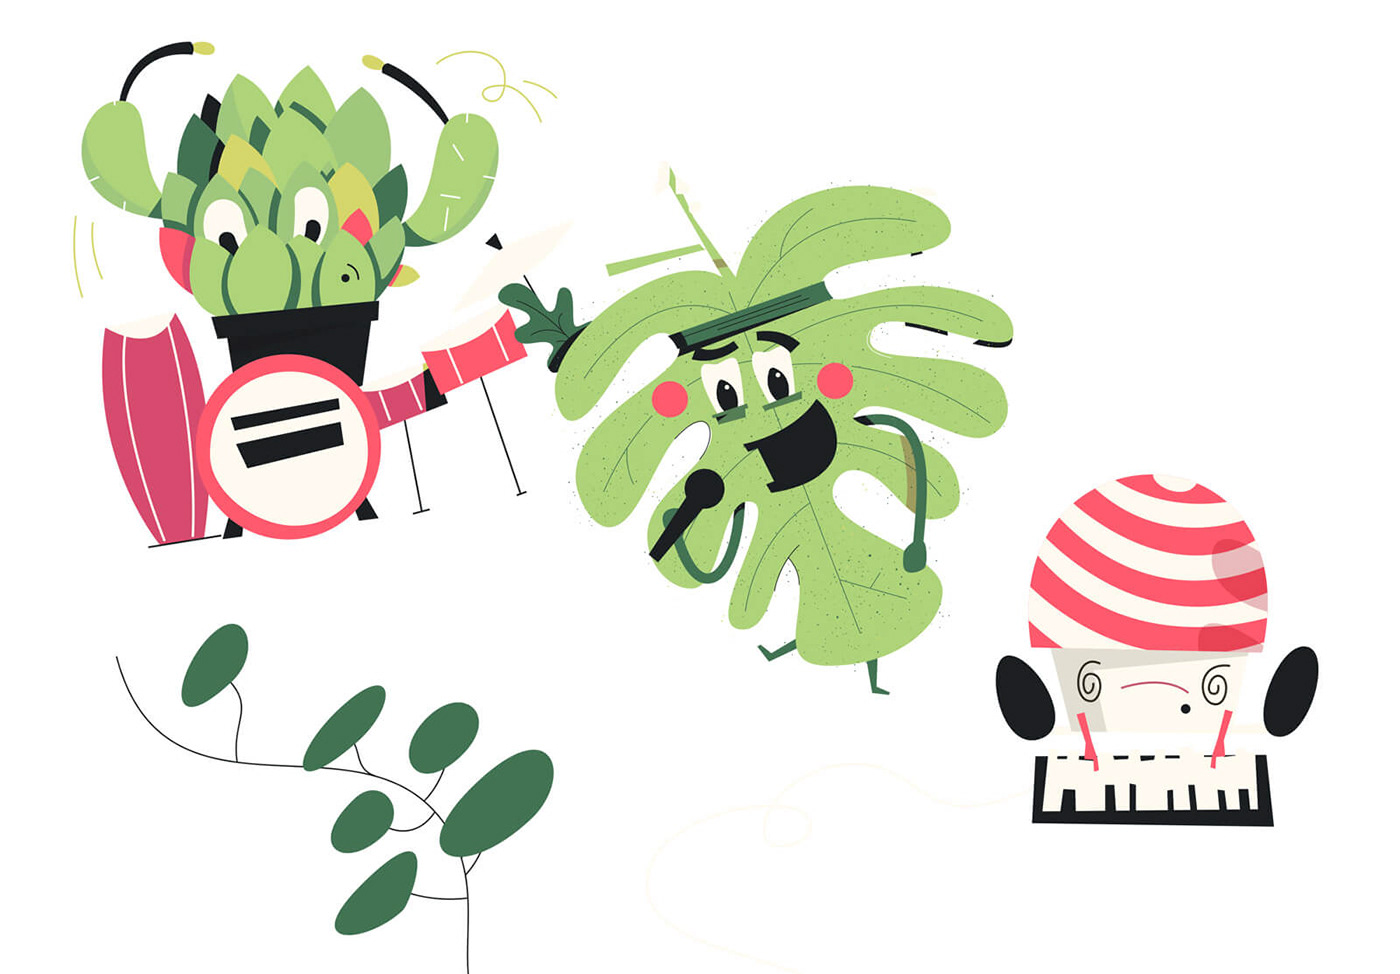 Early sketches of the plant characters in various formats